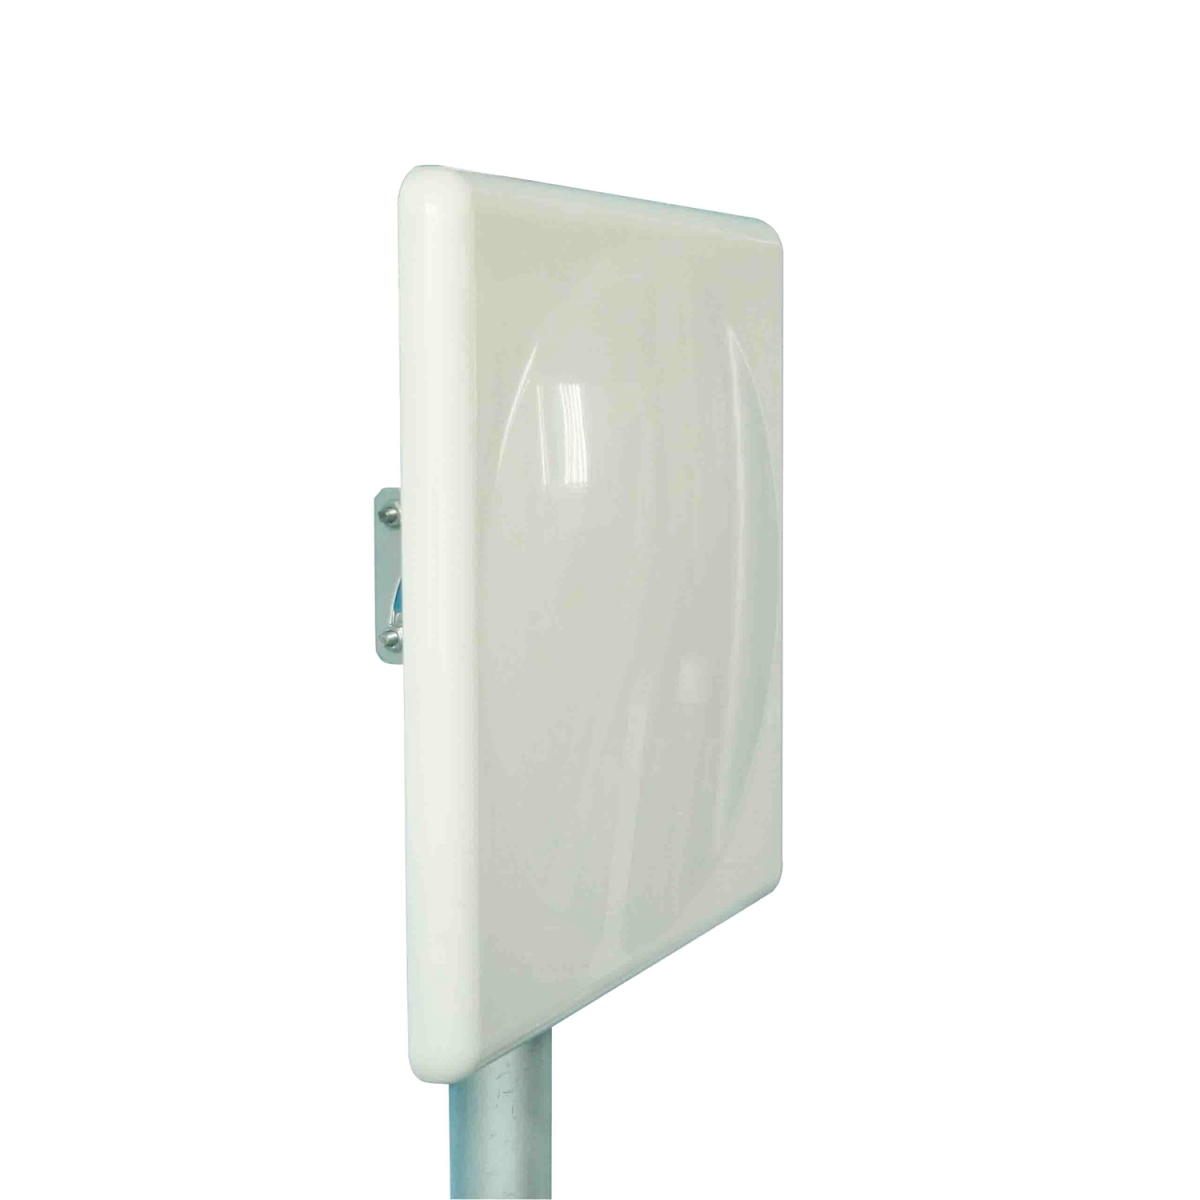 Picture of Turmode WAP59203 Panel WiFi Antenna for 5.8GHz